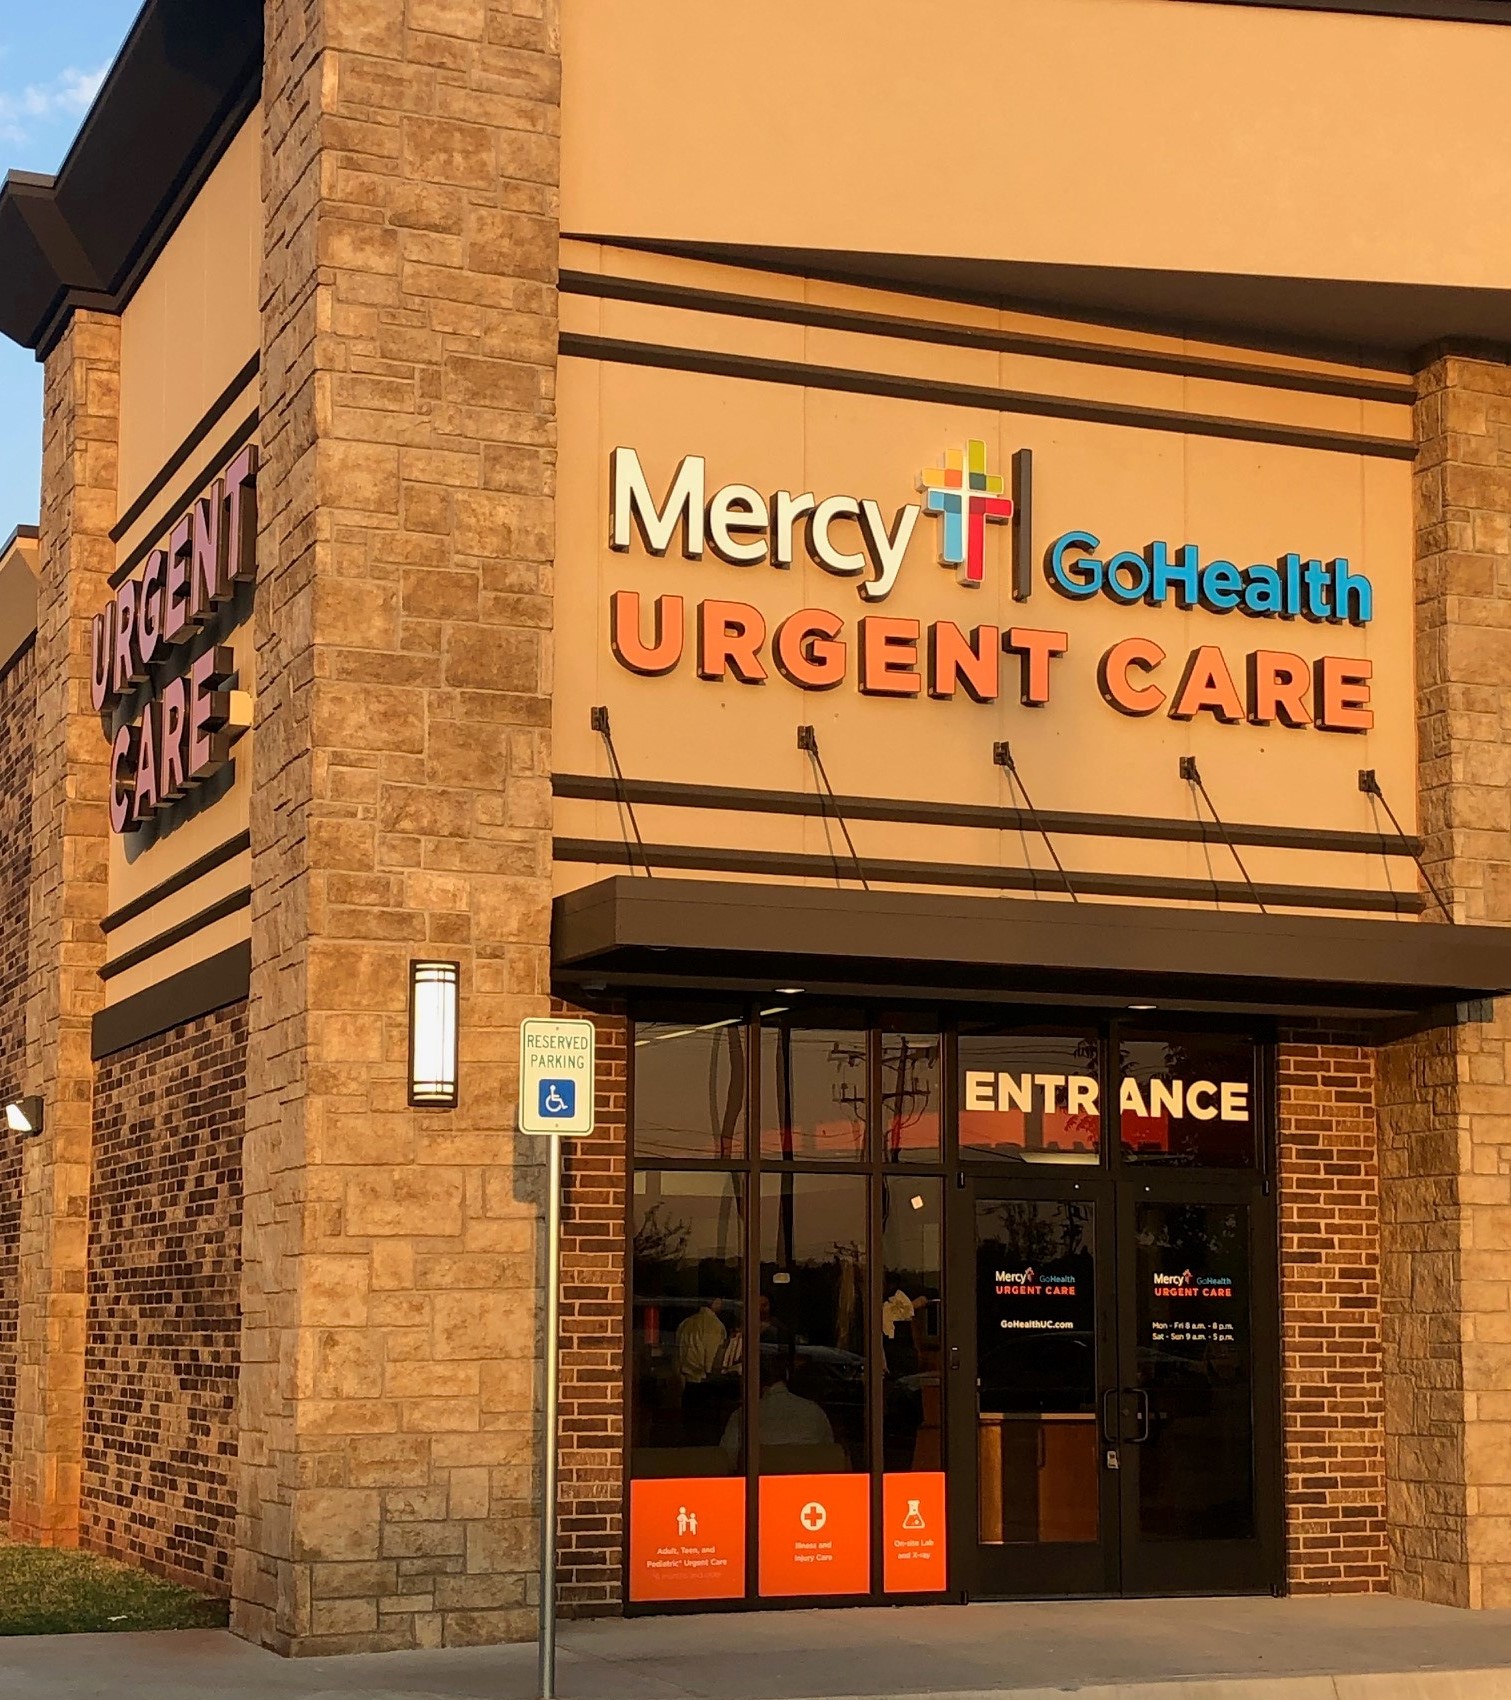 Mercy-GoHealth Adds Two More Urgent Care Centers in Metro Area | Mercy